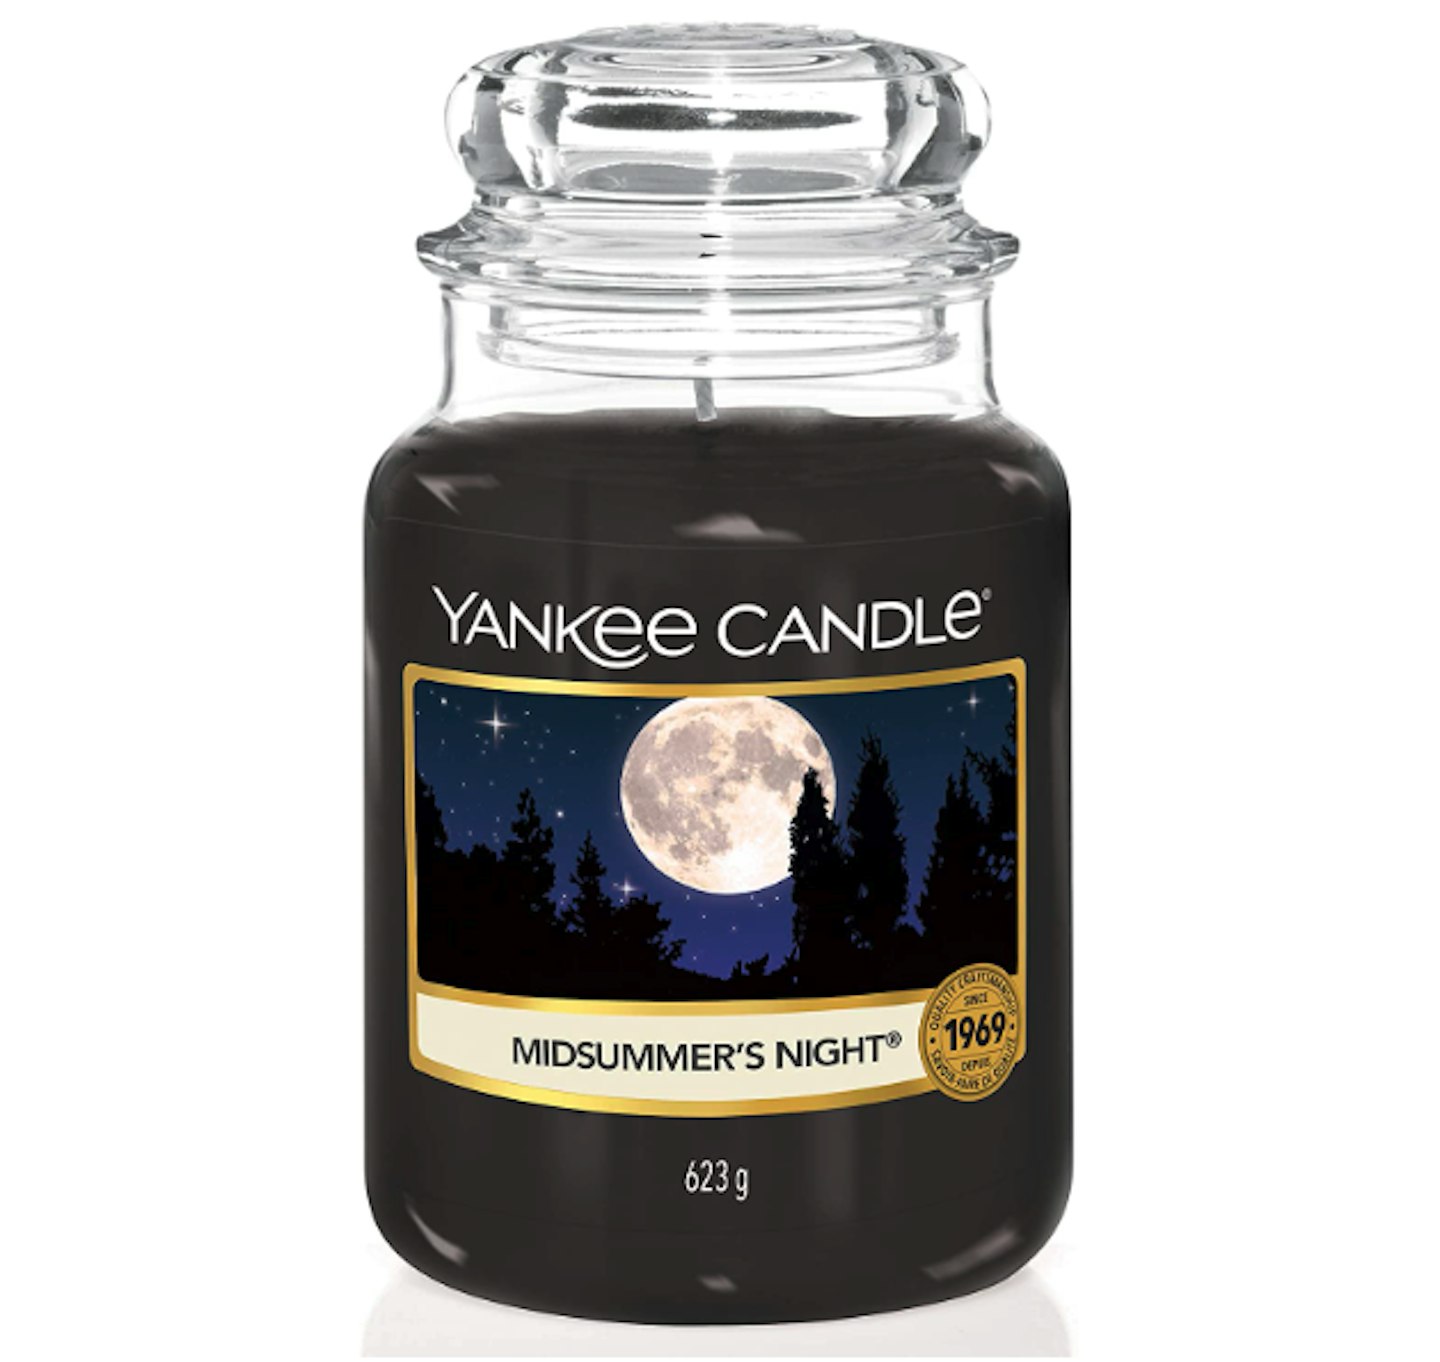 Yankee Candle Large Jar Scented Candle, Midsummeru2019s Night